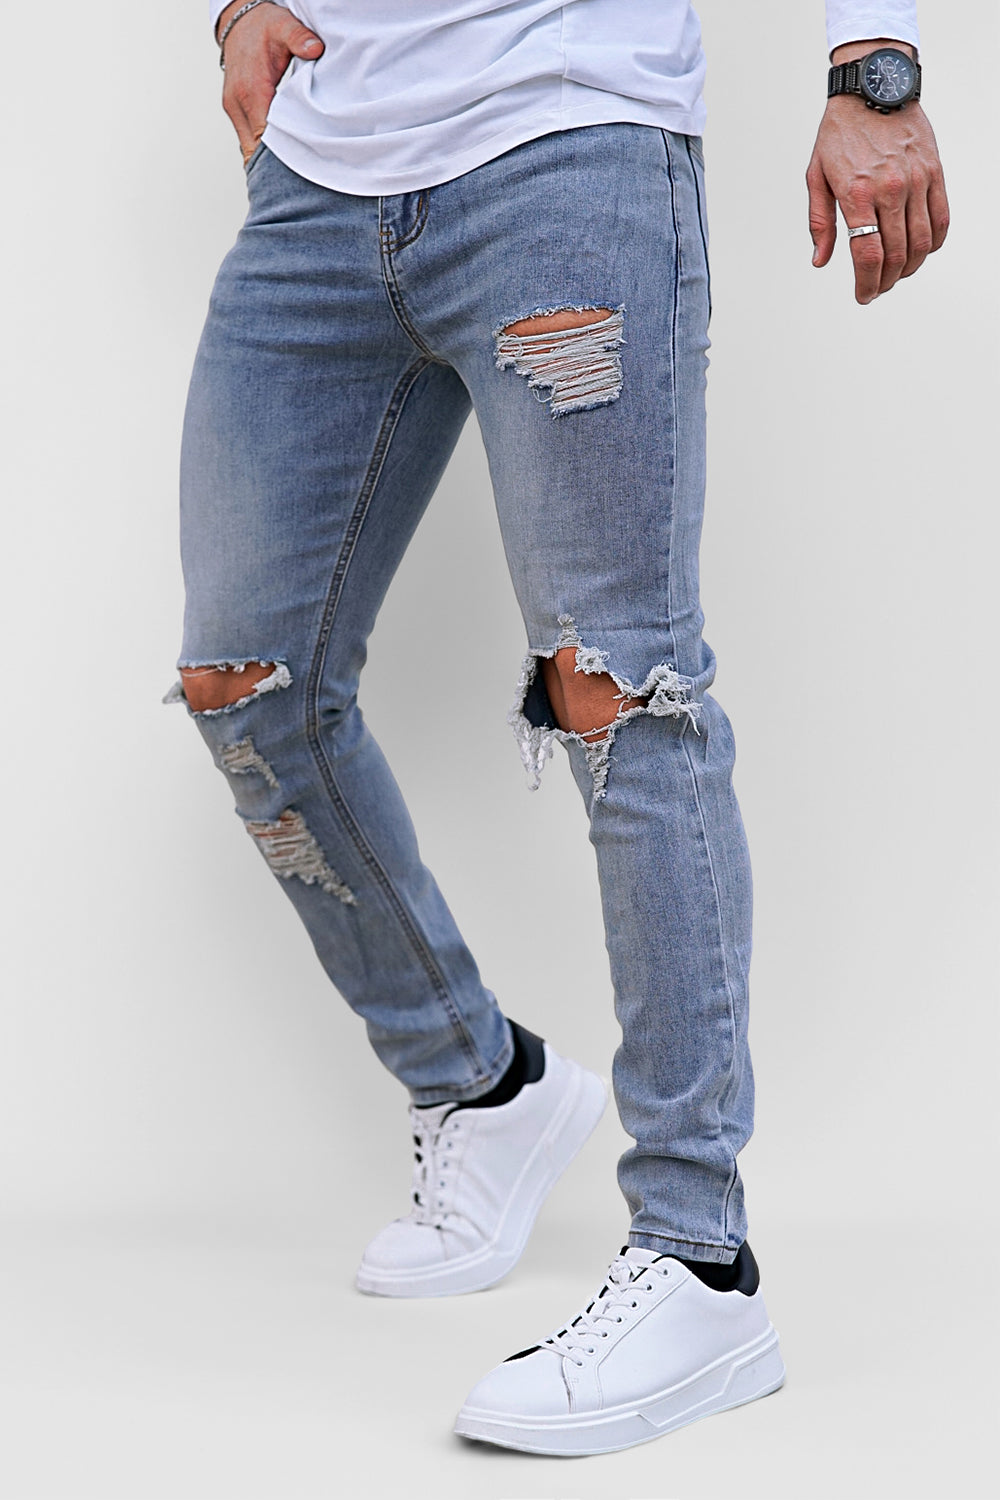 Gingtto Men's Ripped Slim Fit Jeans